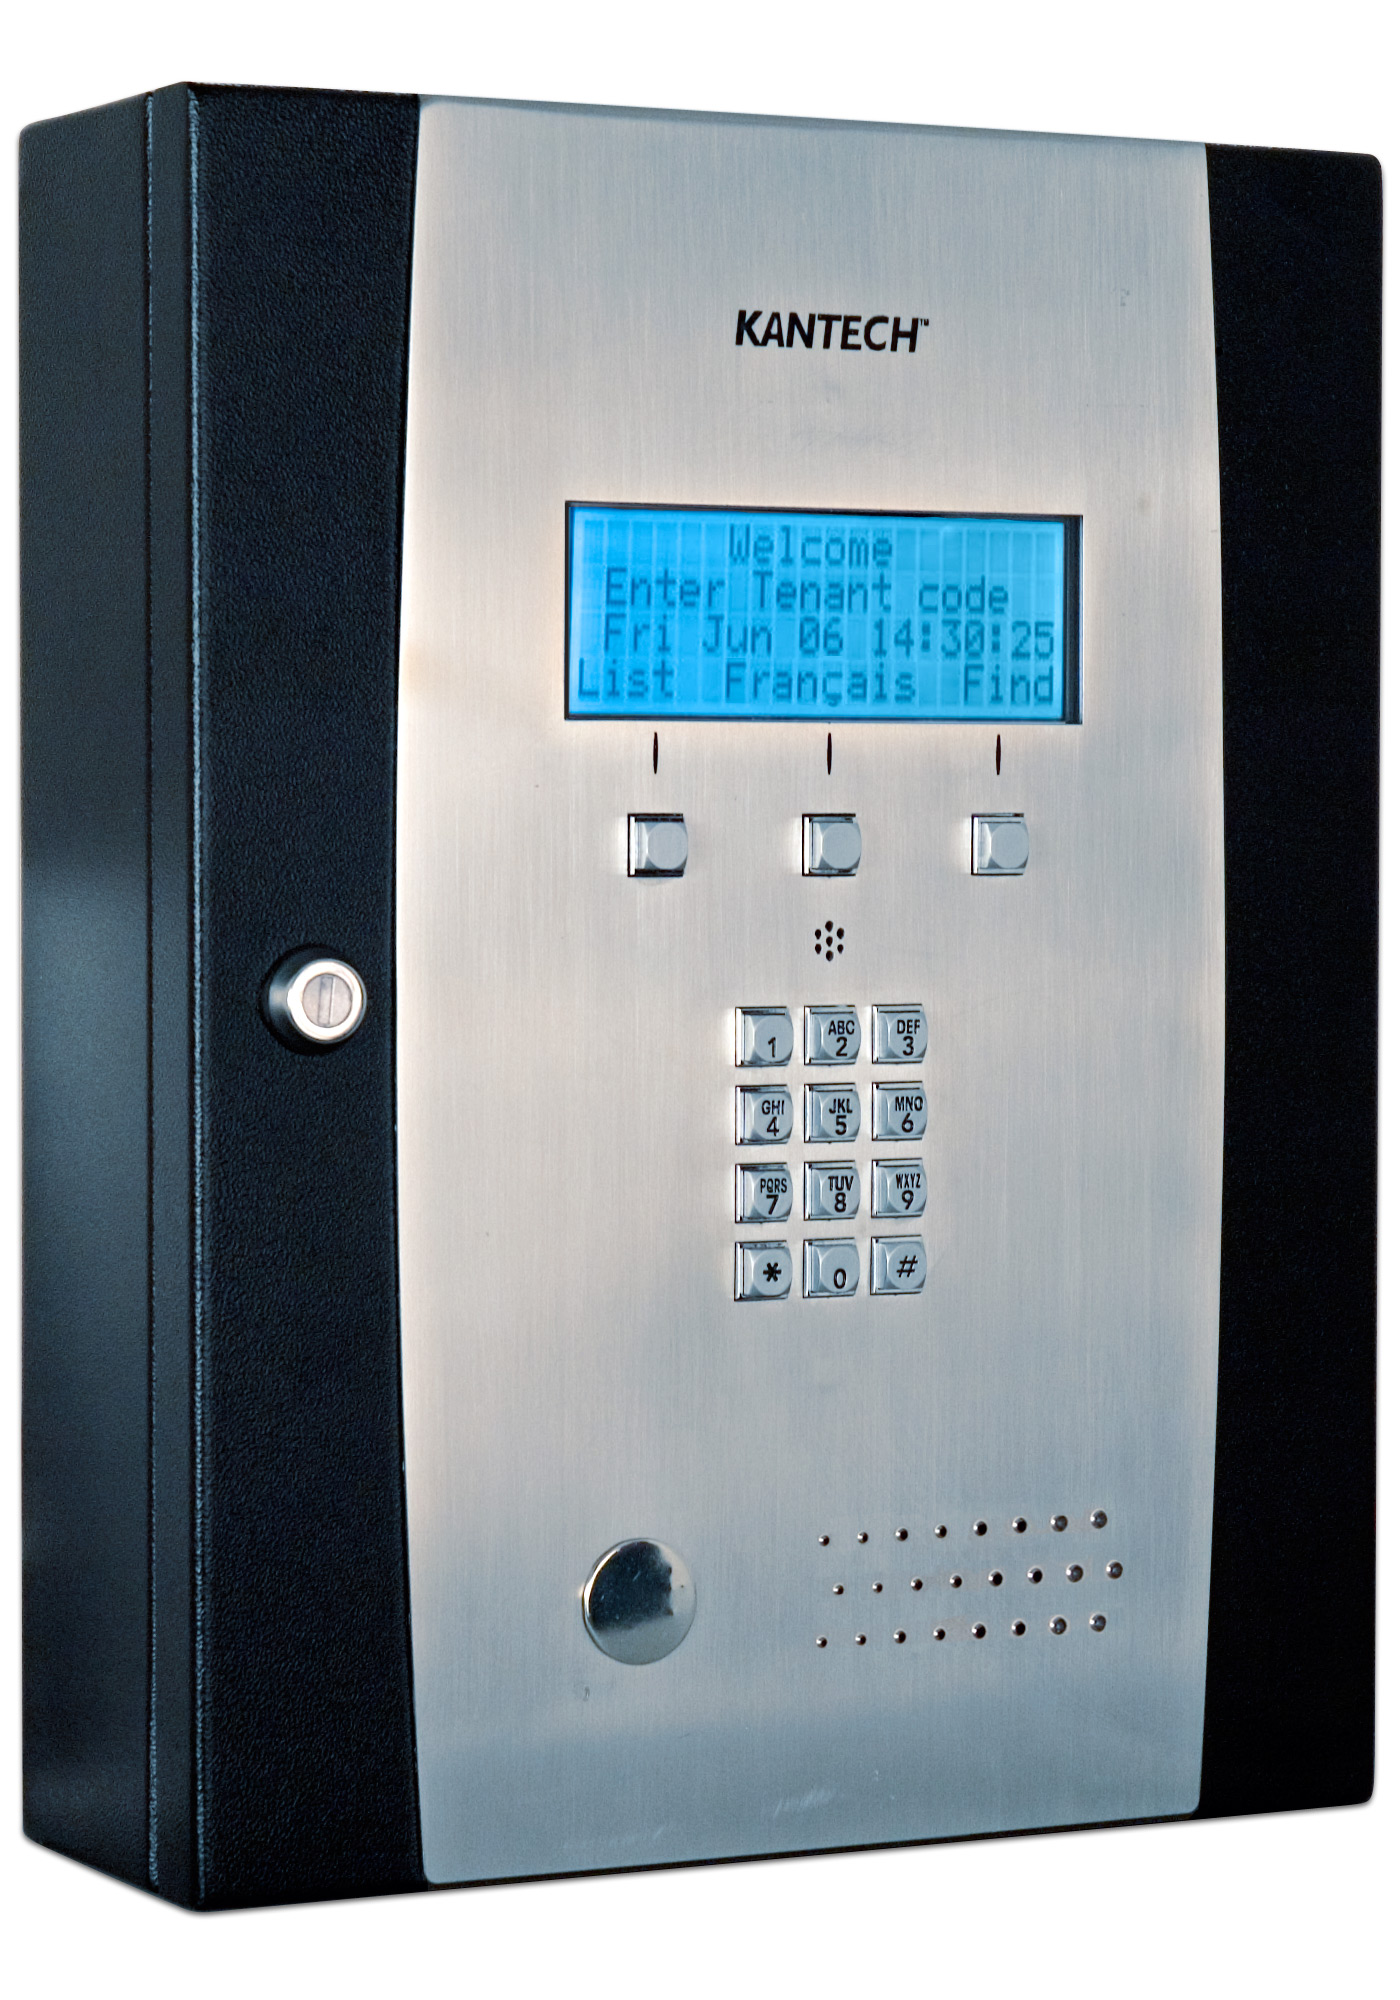 Kantech Telephone Entry System (KTES) - Right View